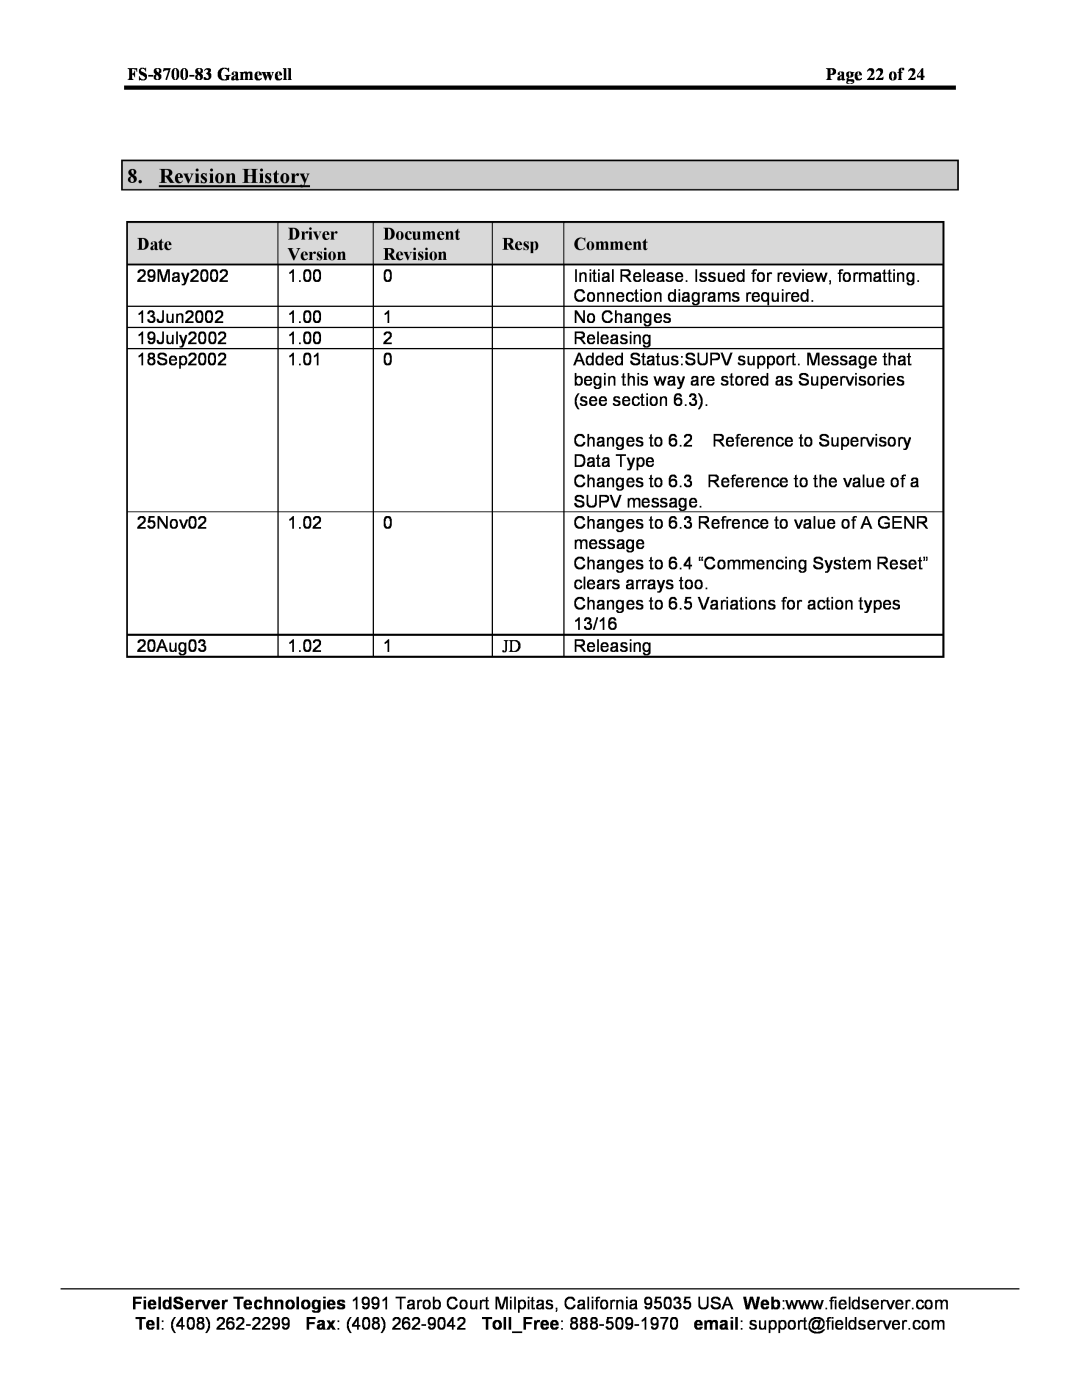 FieldServer Revision History, FS-8700-83 Gamewell, Page 22 of, Date, Driver, Document, Resp, Comment, Version 